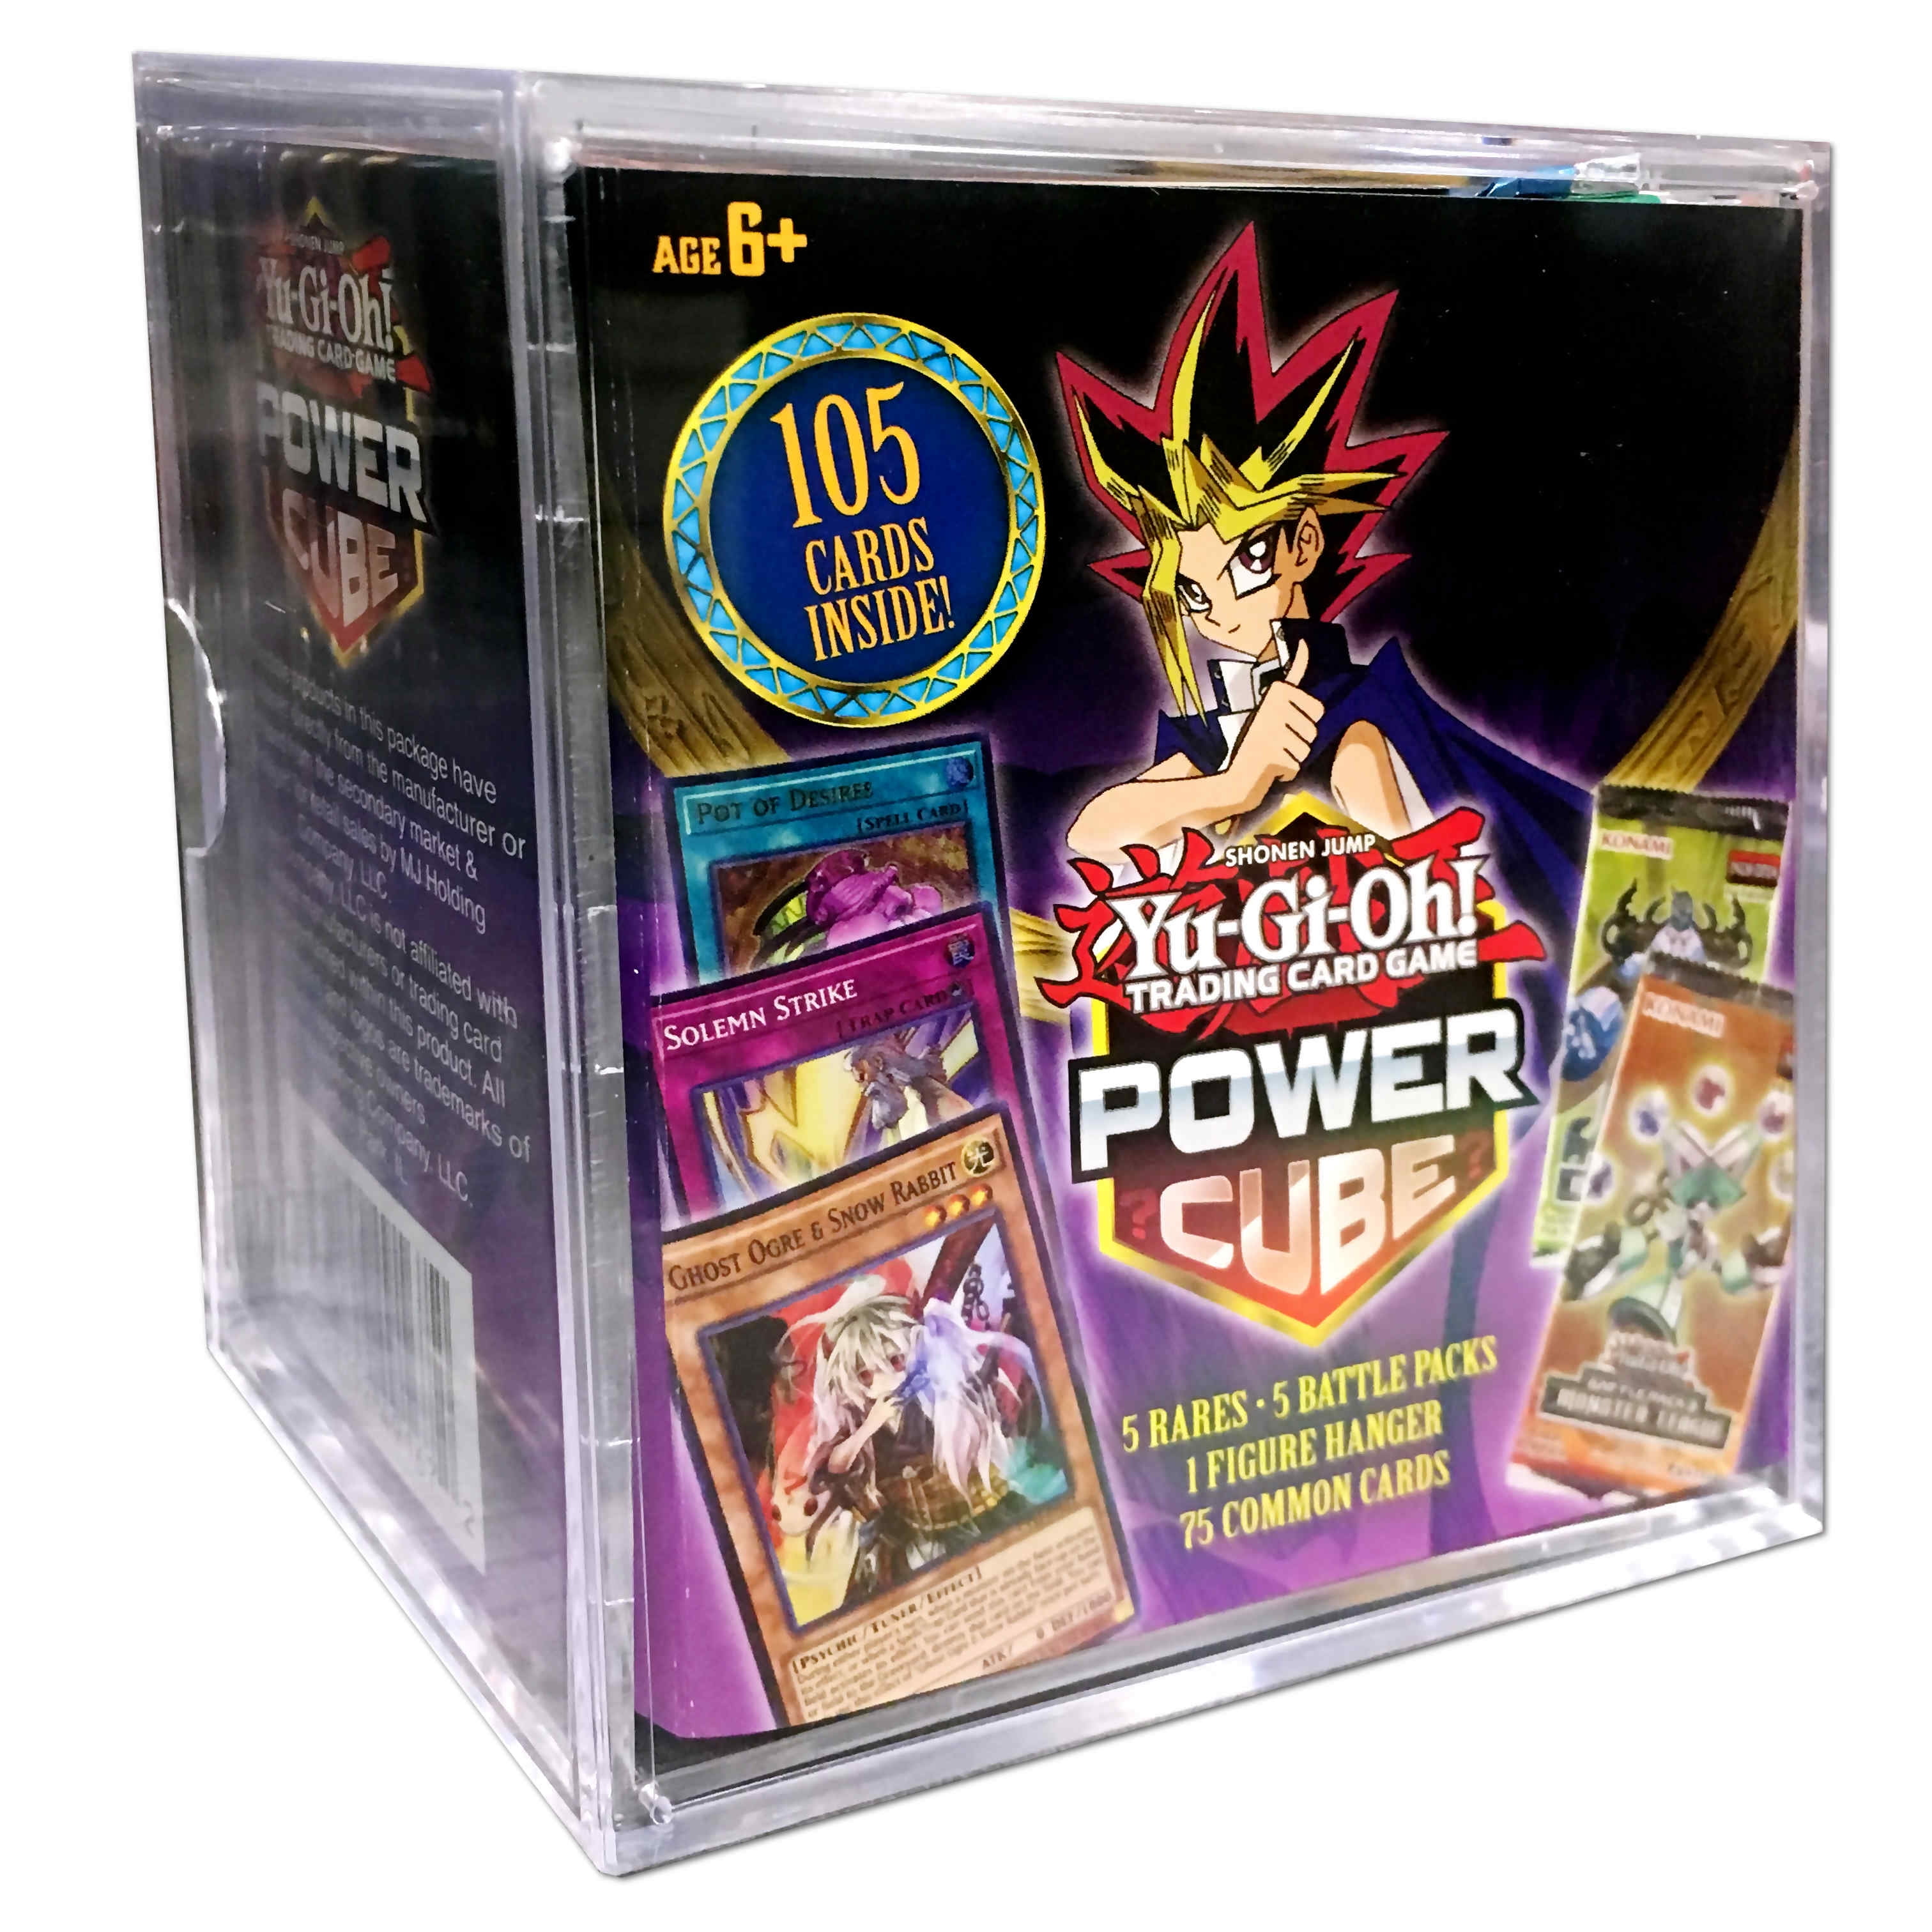 image 0 of Yu-Gi-Oh! Trading Card Game Power Cube 5 Rares - 5 Battle packs - 1 Figure Hanger - 75 Common Cards